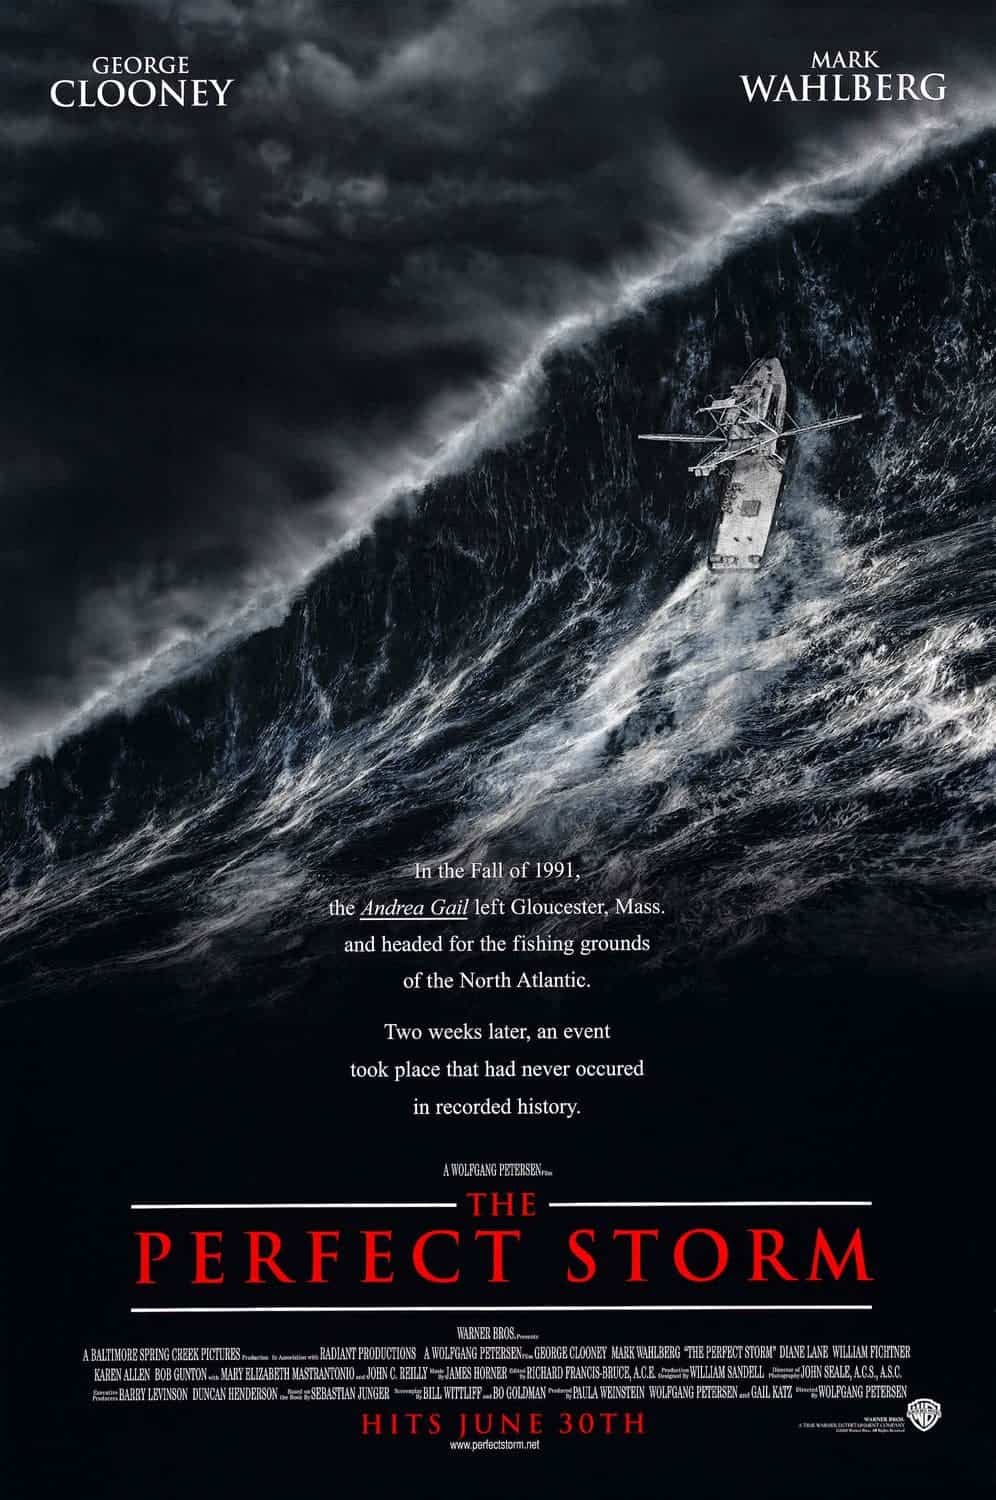 The Perfect Storm (2000) Best Tsunami Movies to Add in Your Watchlist